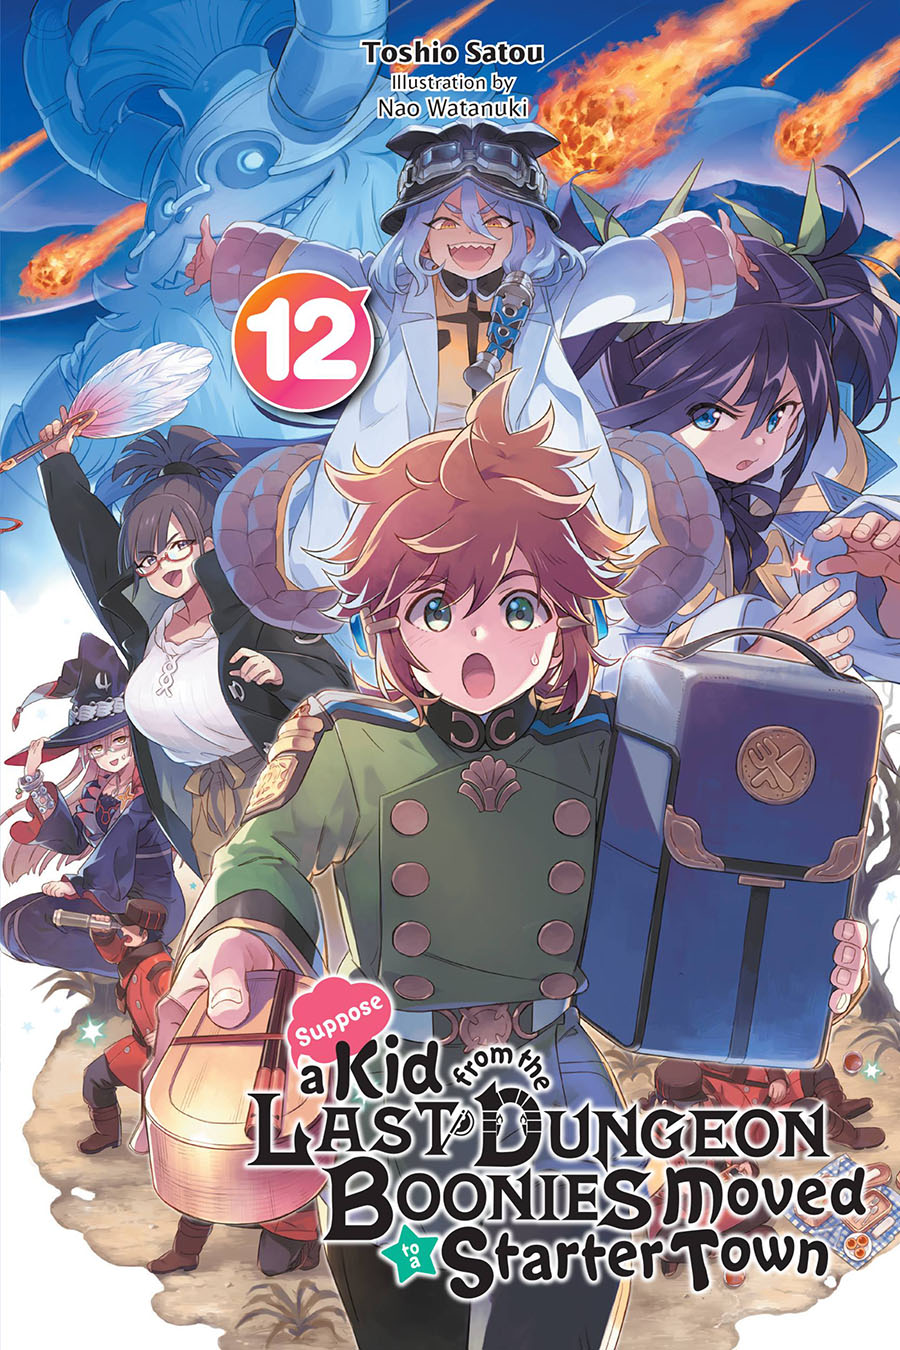 Suppose A Kid From The Last Dungeon Boonies Moved To A Starter Town Light Novel Vol 12